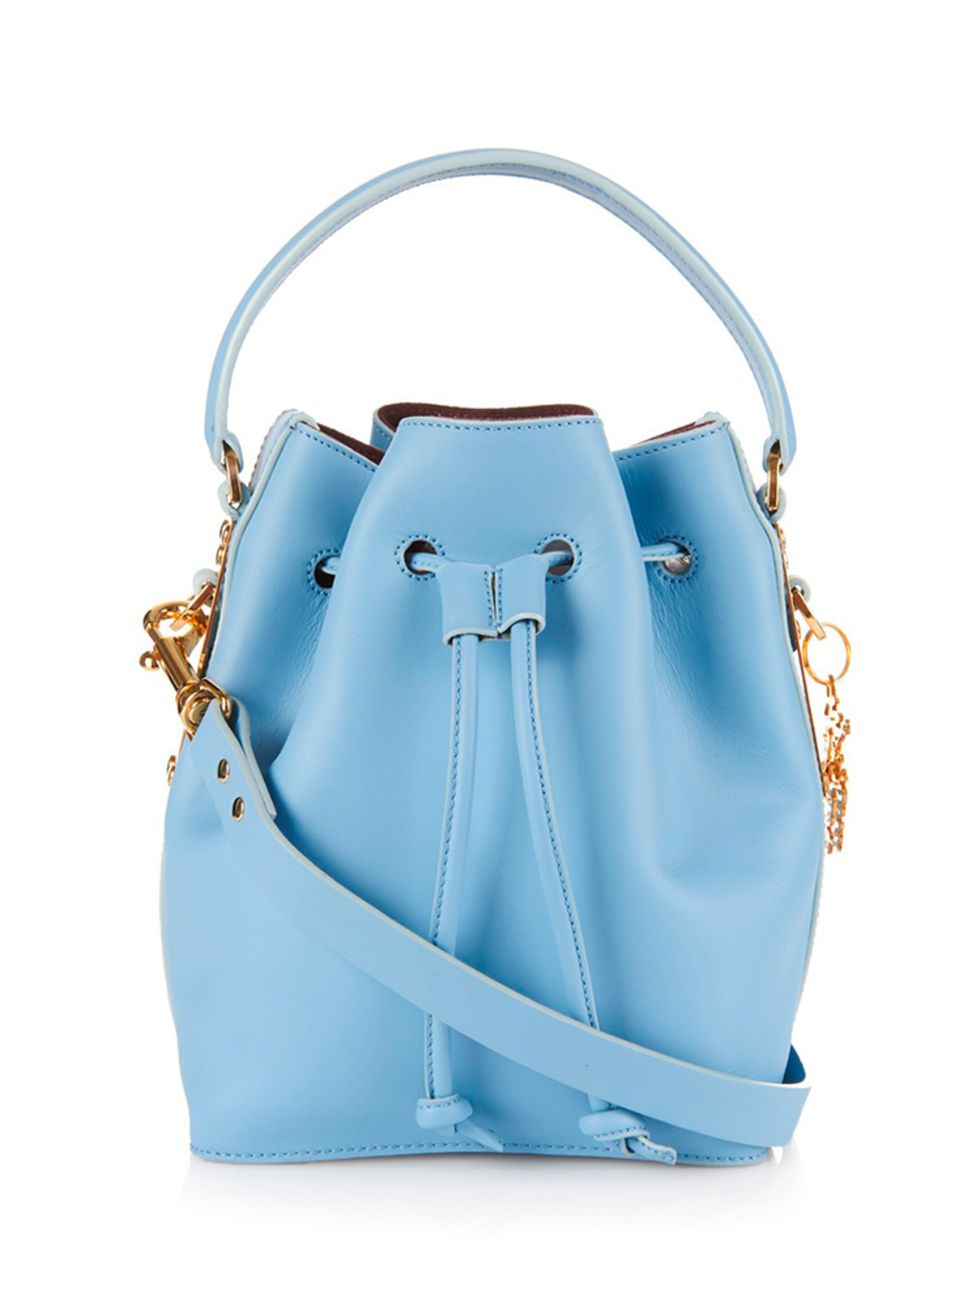 <p>Sophie Hulme bucket bag, £595 available at <a href="http://www.matchesfashion.com/products/Sophie-Hulme-Fleetwood-small-leather-bucket-bag-1018201" target="_blank">matchesfashion.com</a></p>